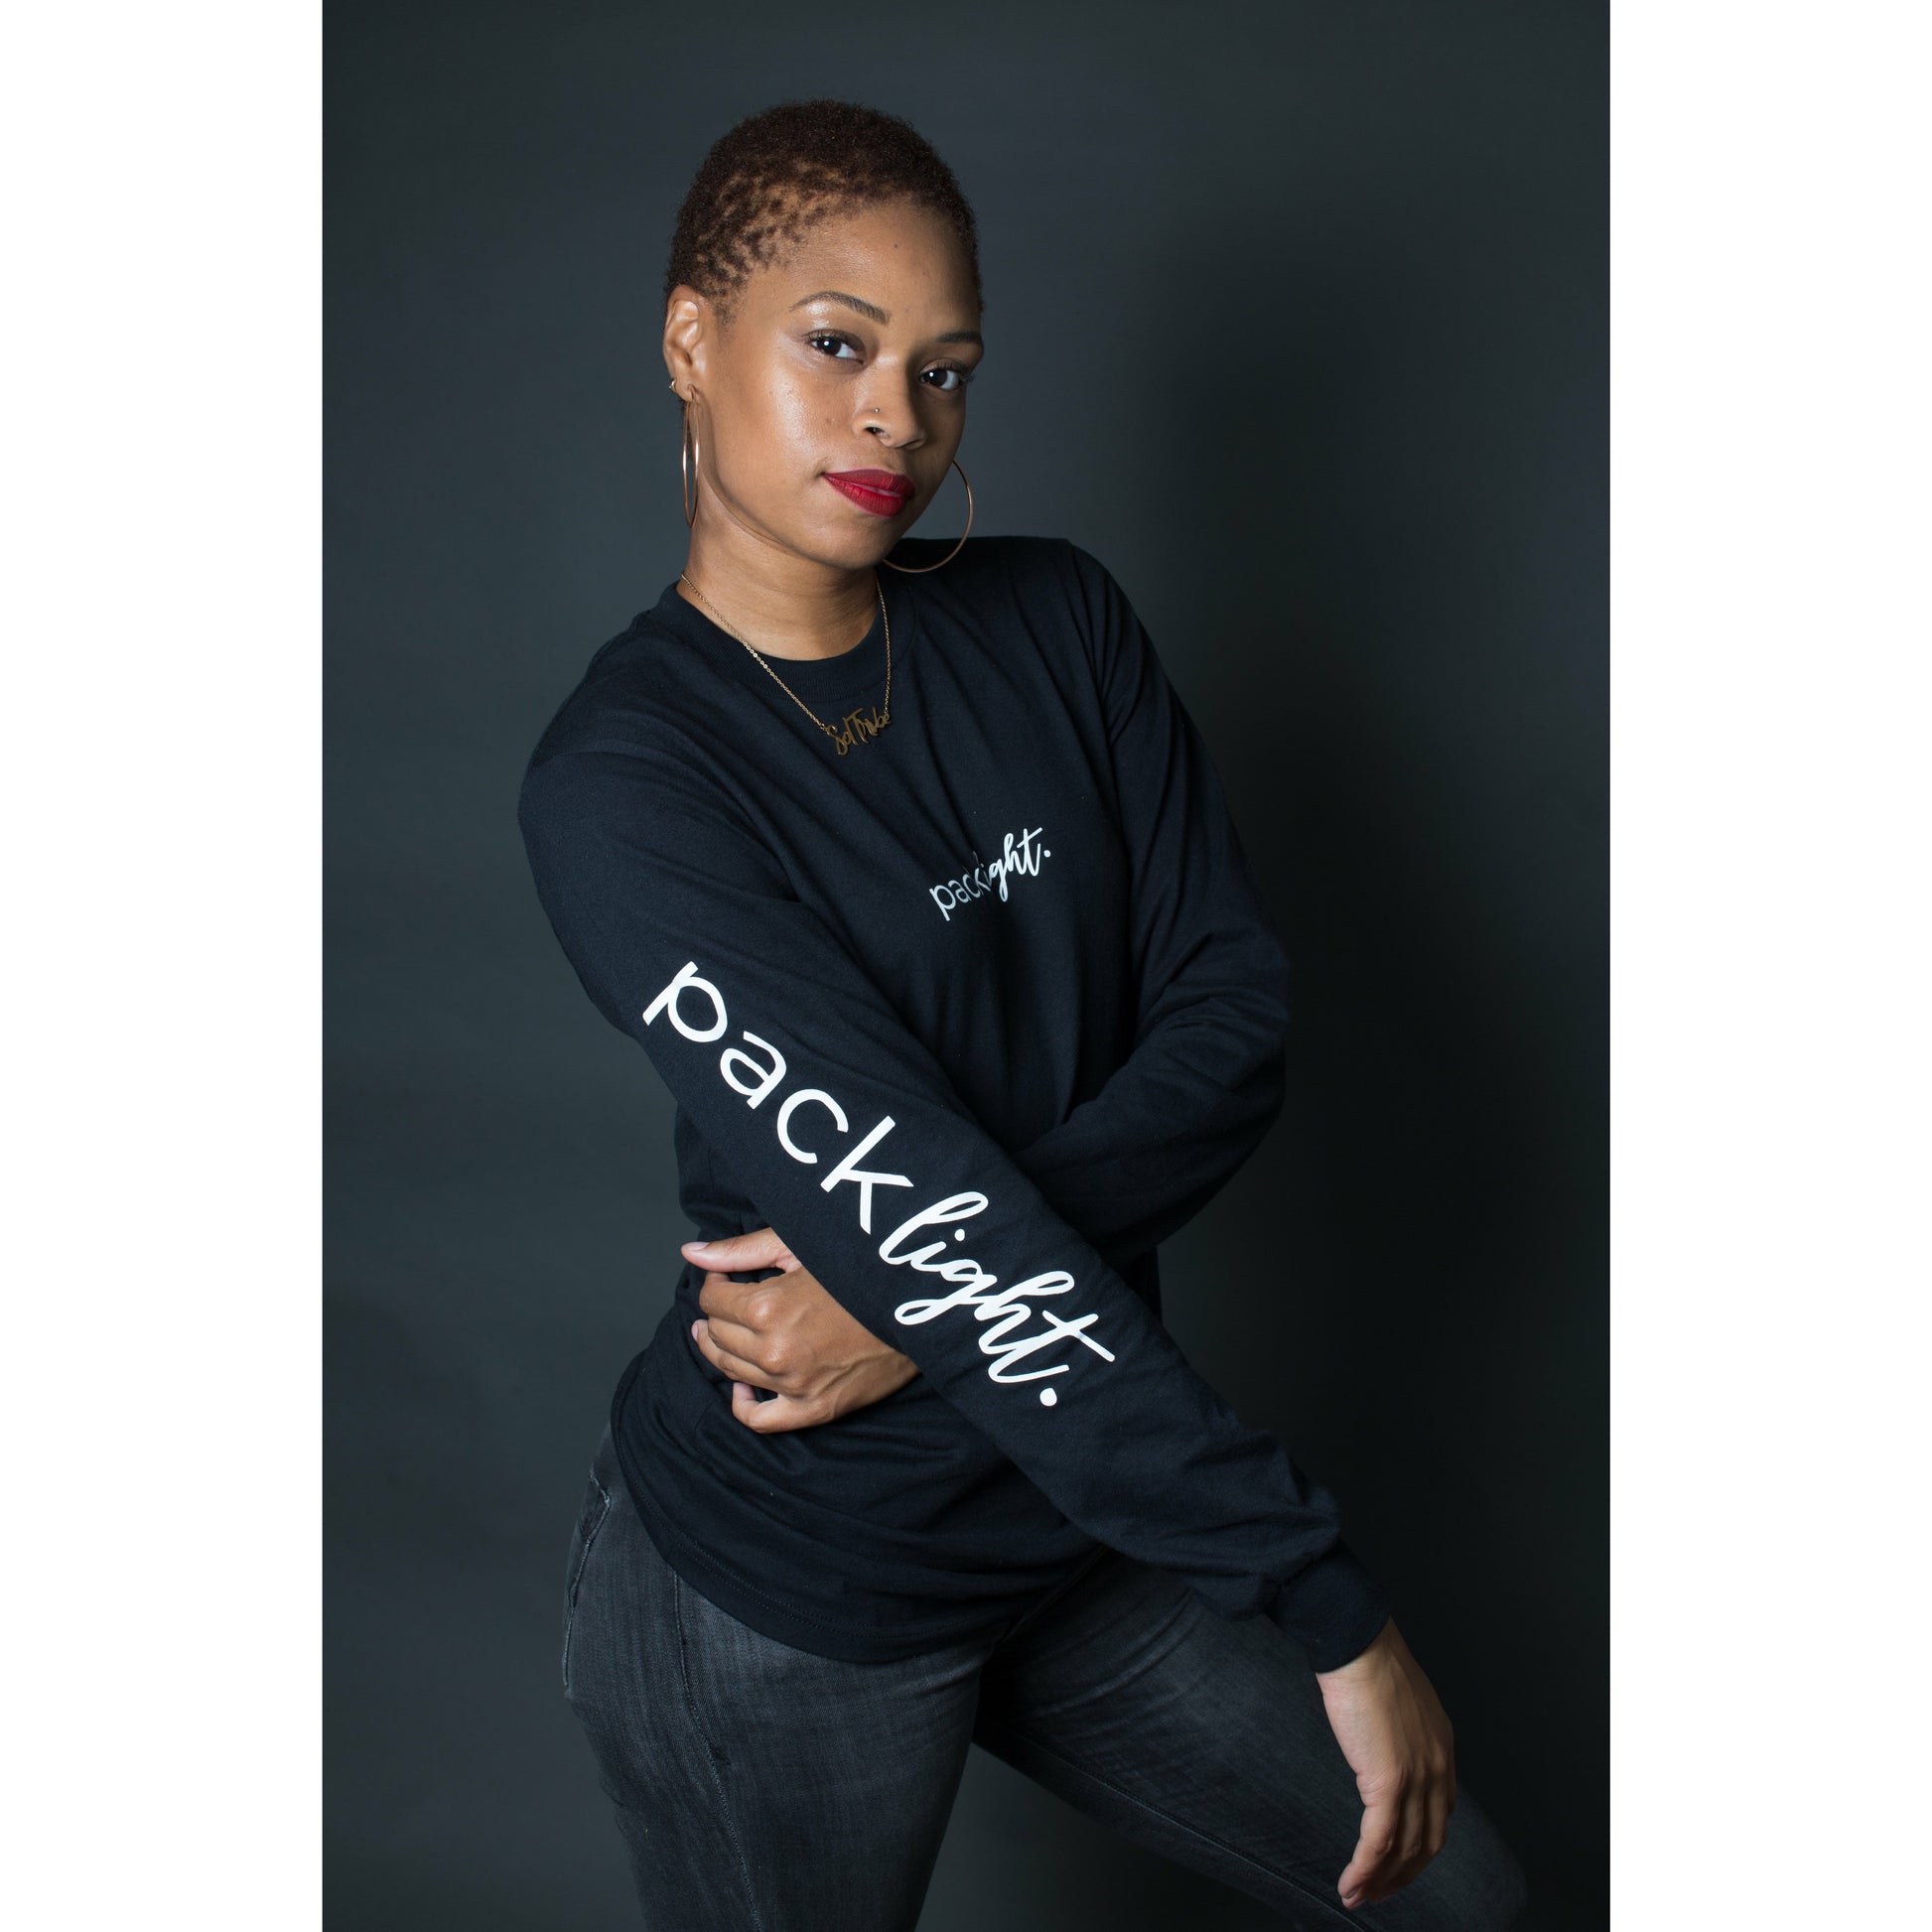 woman model wearing black affirmation tee that says Pack Light on the sleeve and front of the tee by Sol Rise Essentials